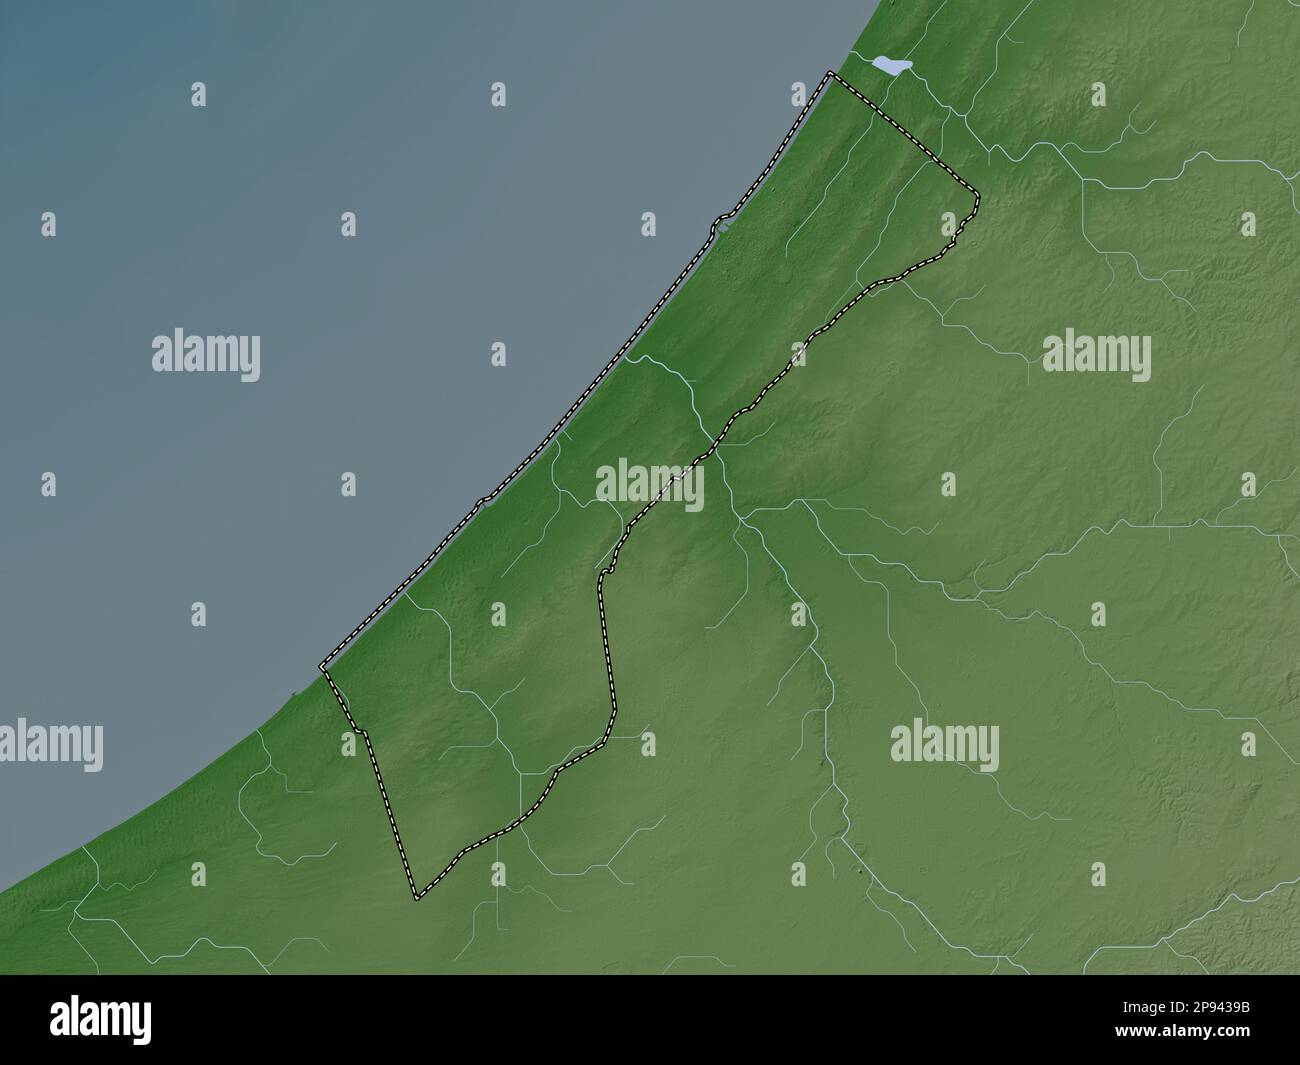 Gaza Strip, region of Palestine. Elevation map colored in wiki style with lakes and rivers Stock Photo